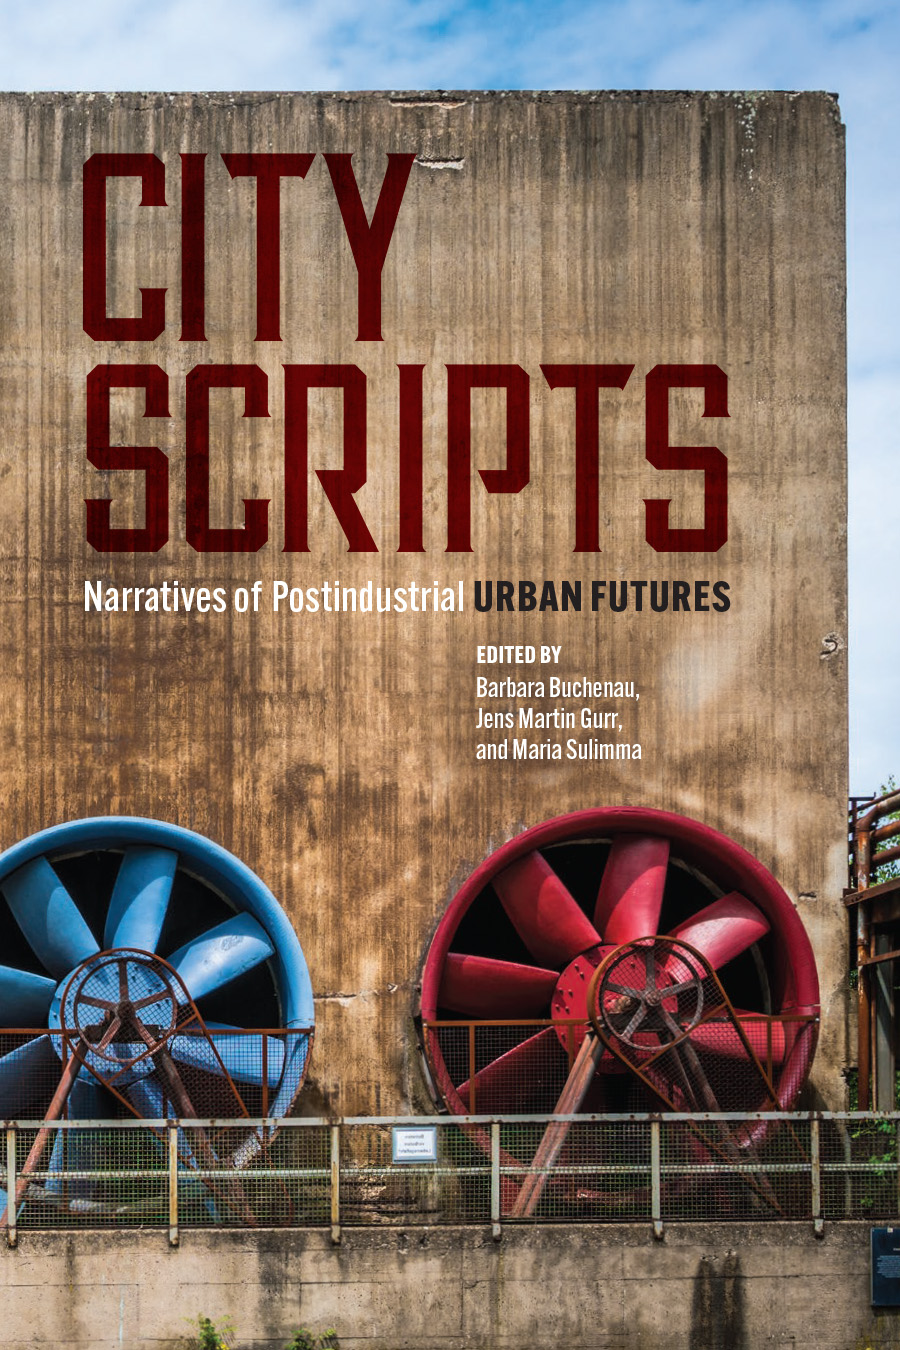 Front cover of City Scripts: Narratives of Postindustrial Urban Futures, featuring a tall concrete wall, set with two large industrial fans, one red and one blue.